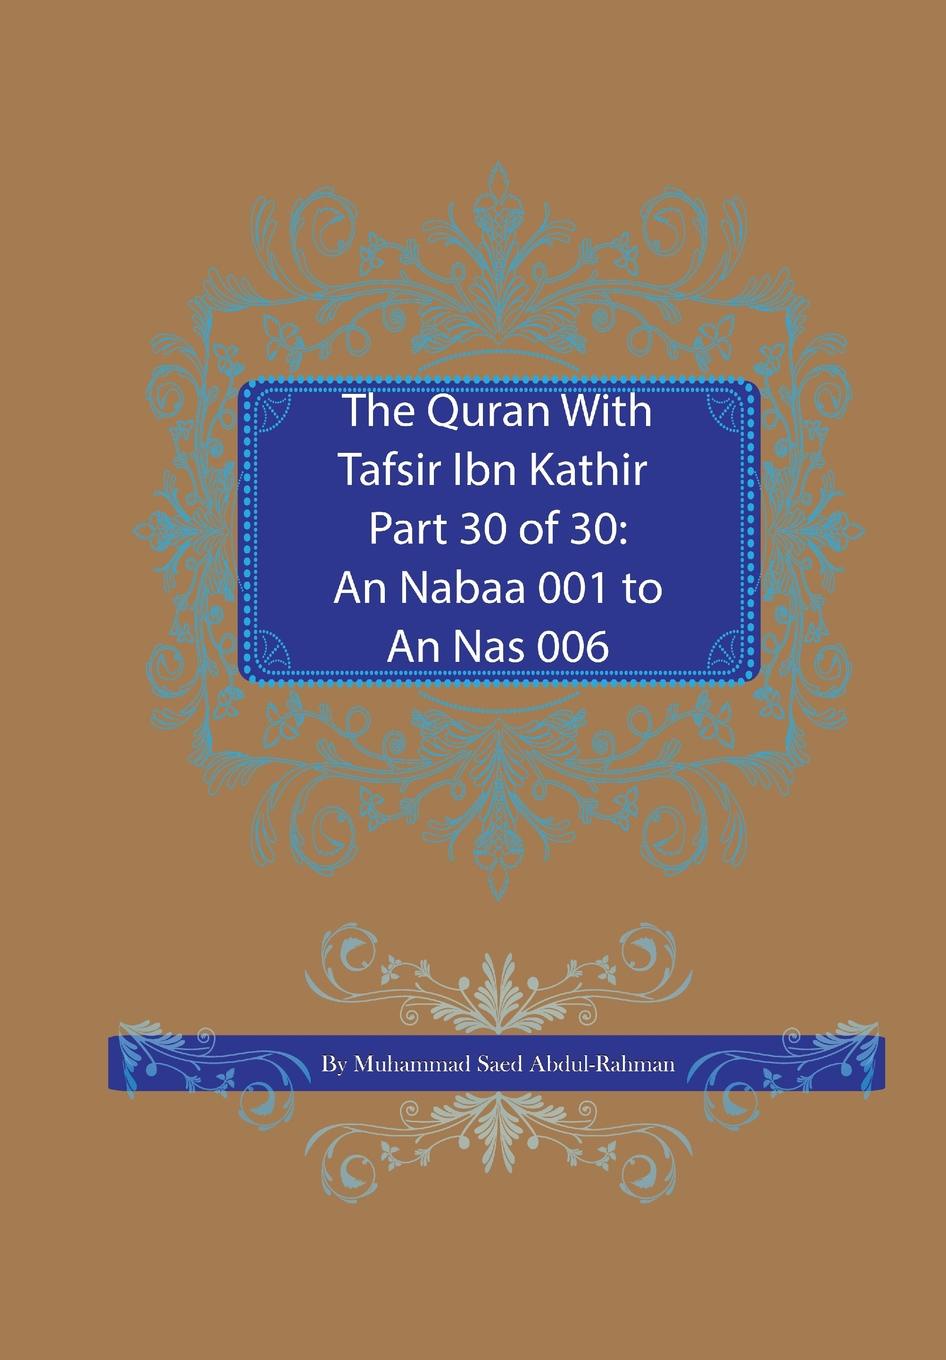 The Quran With Tafsir Ibn Kathir Part 30 of 30. An Nabaa 001 To An Nas 006